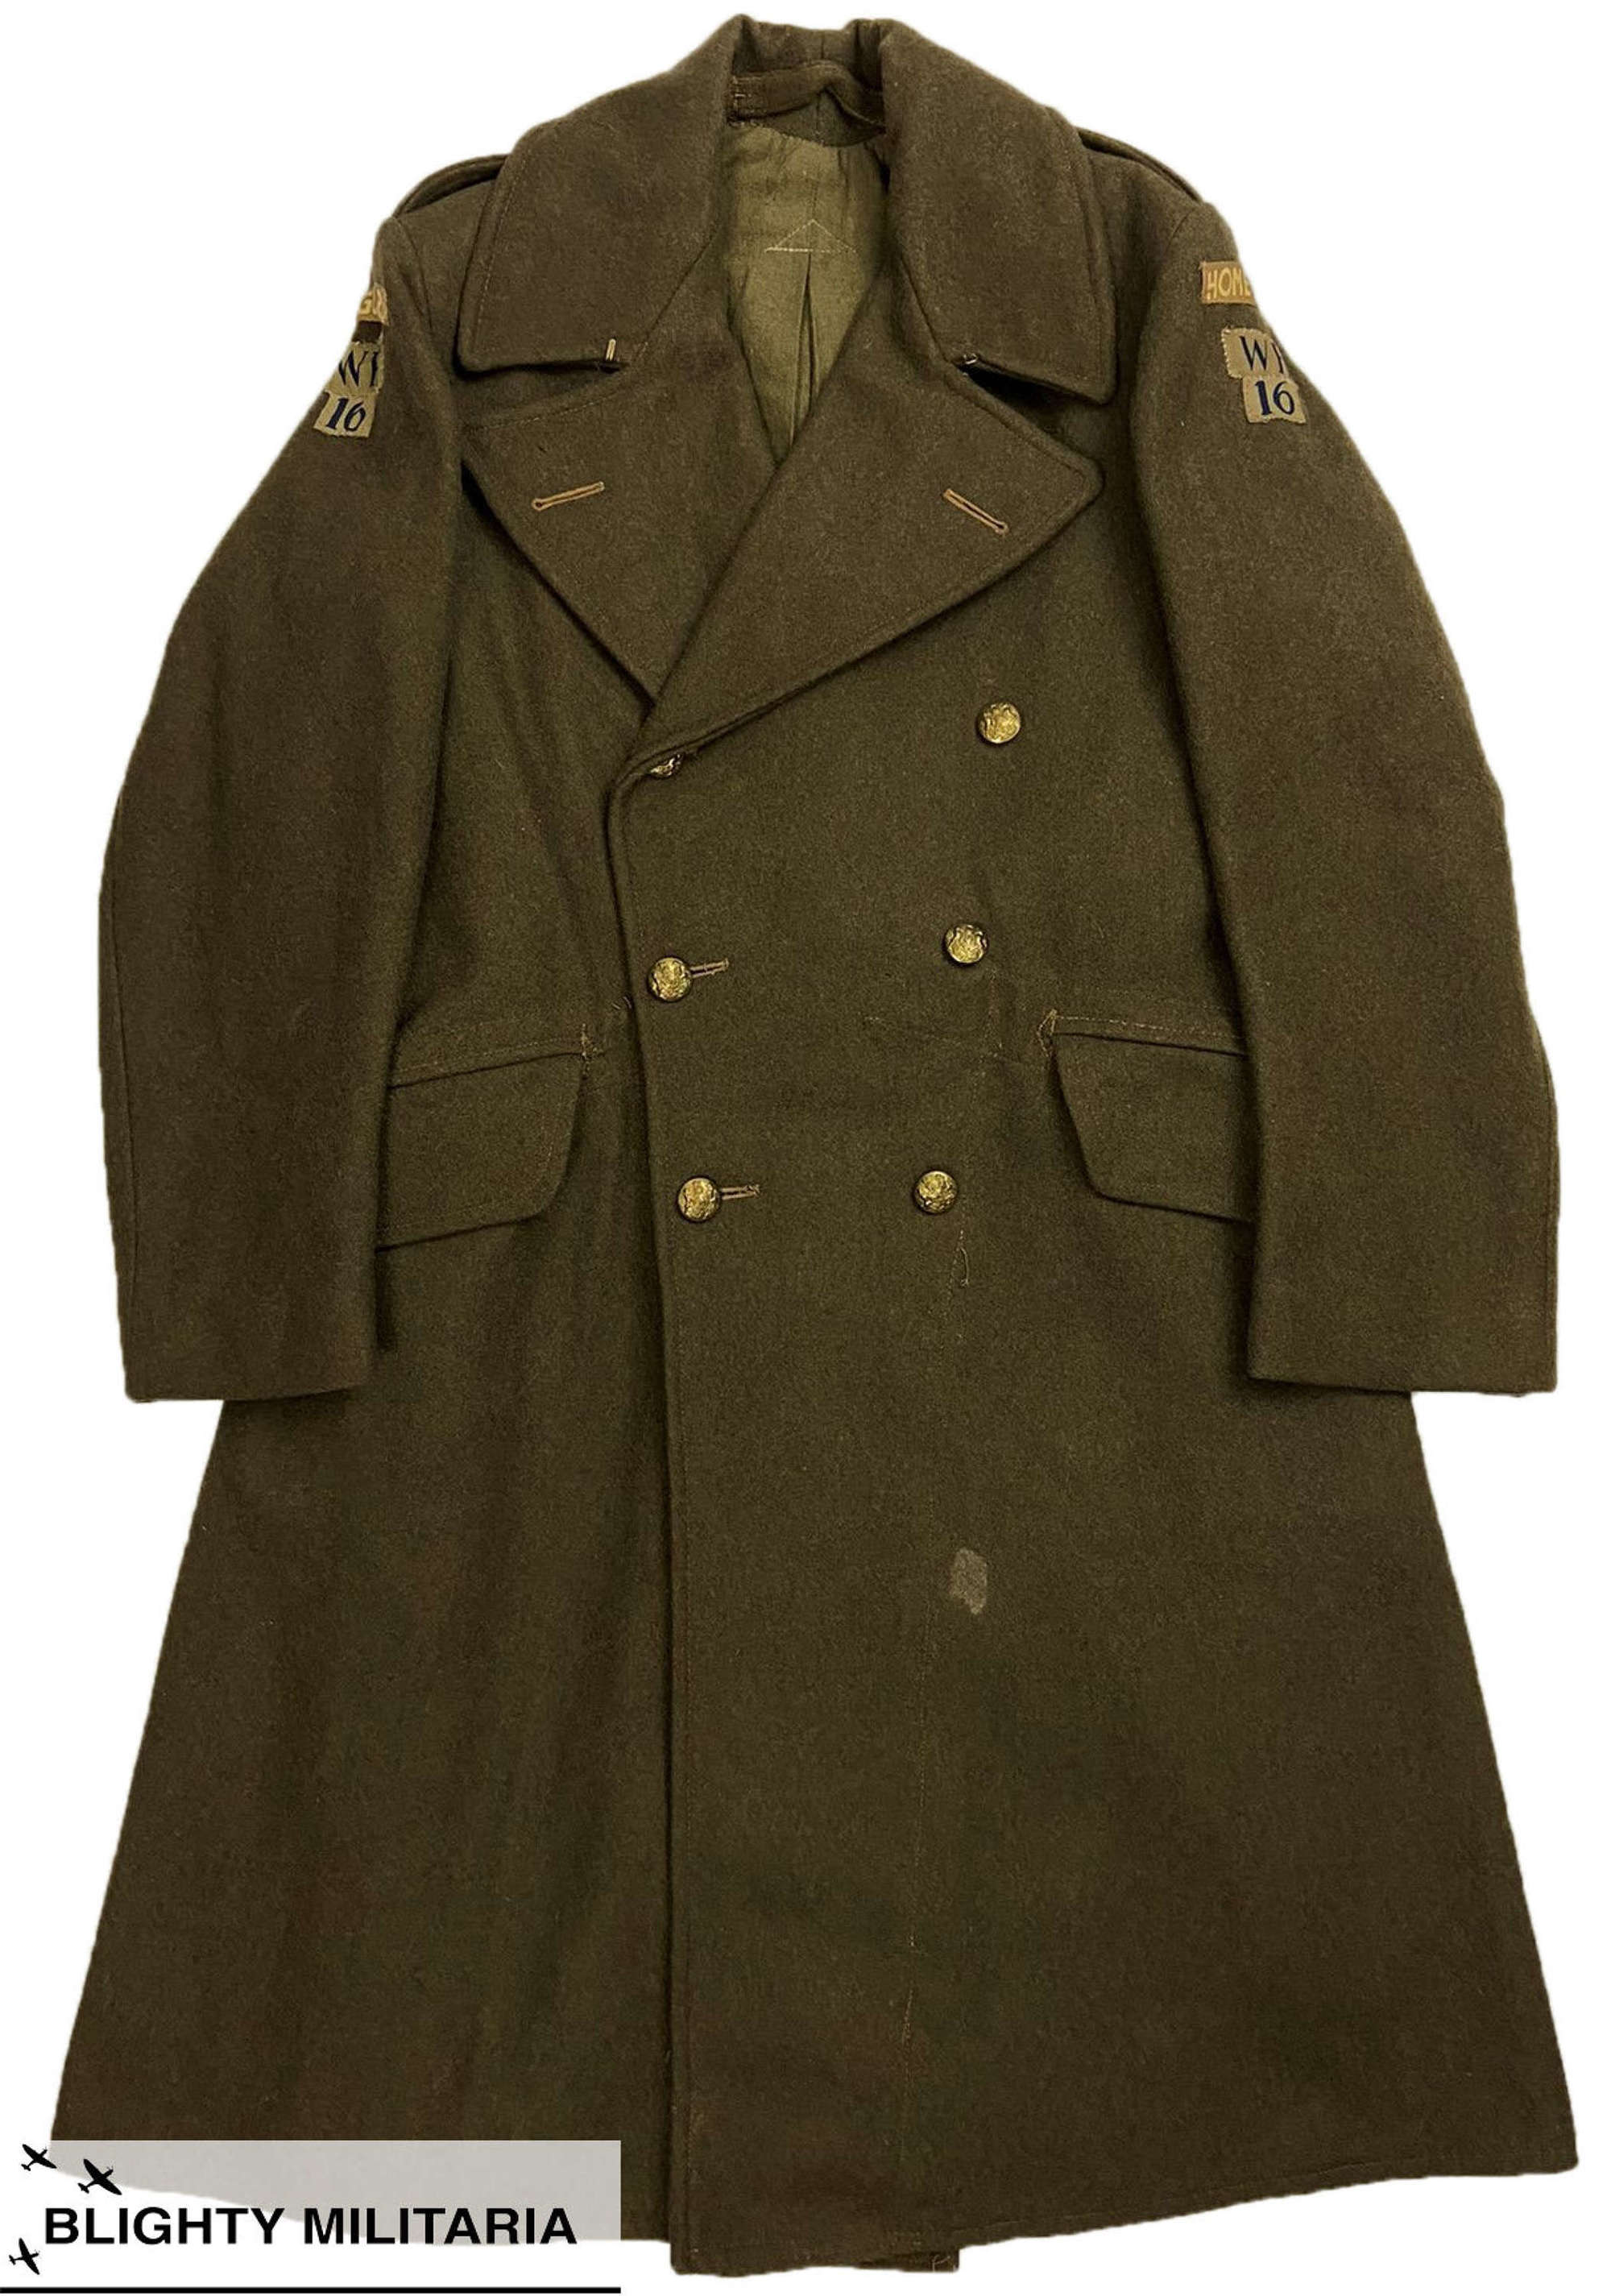 Original 1943 Dated Home Guard Captains Greatcoat - Leeds WR 16